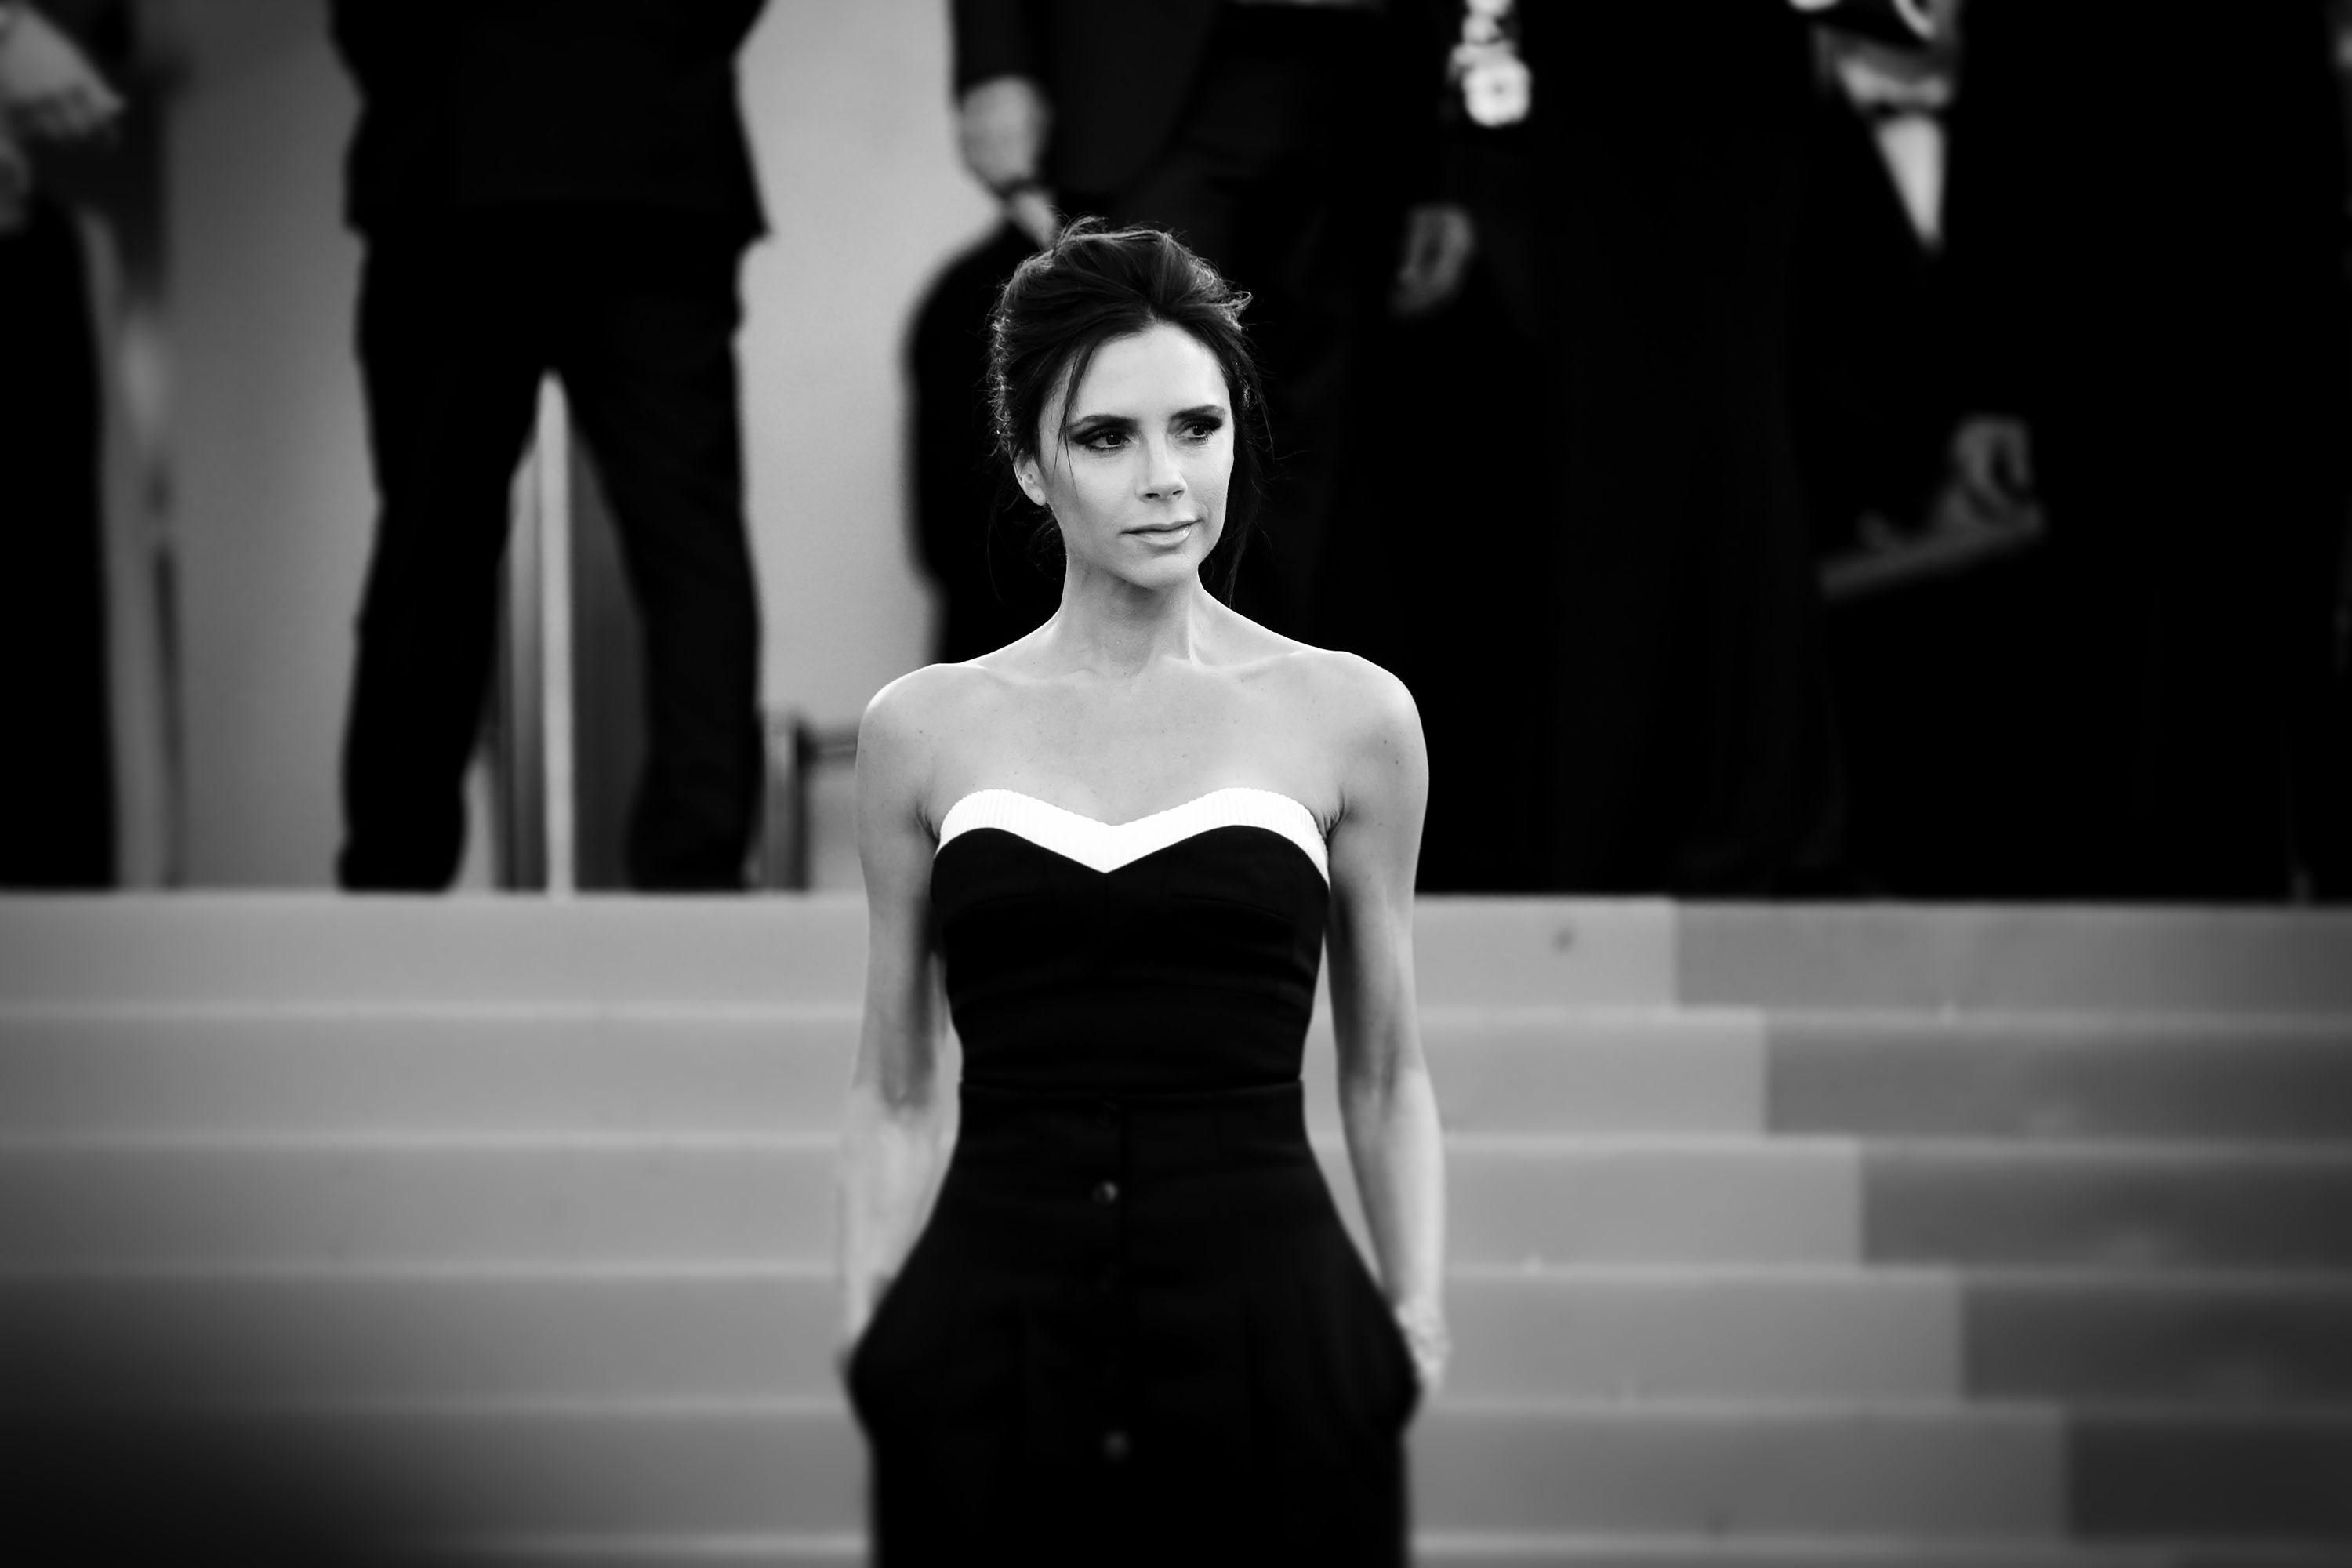 Did you know? Victoria Beckham was once spotted carrying a knock-off Louis  Vuitton bag